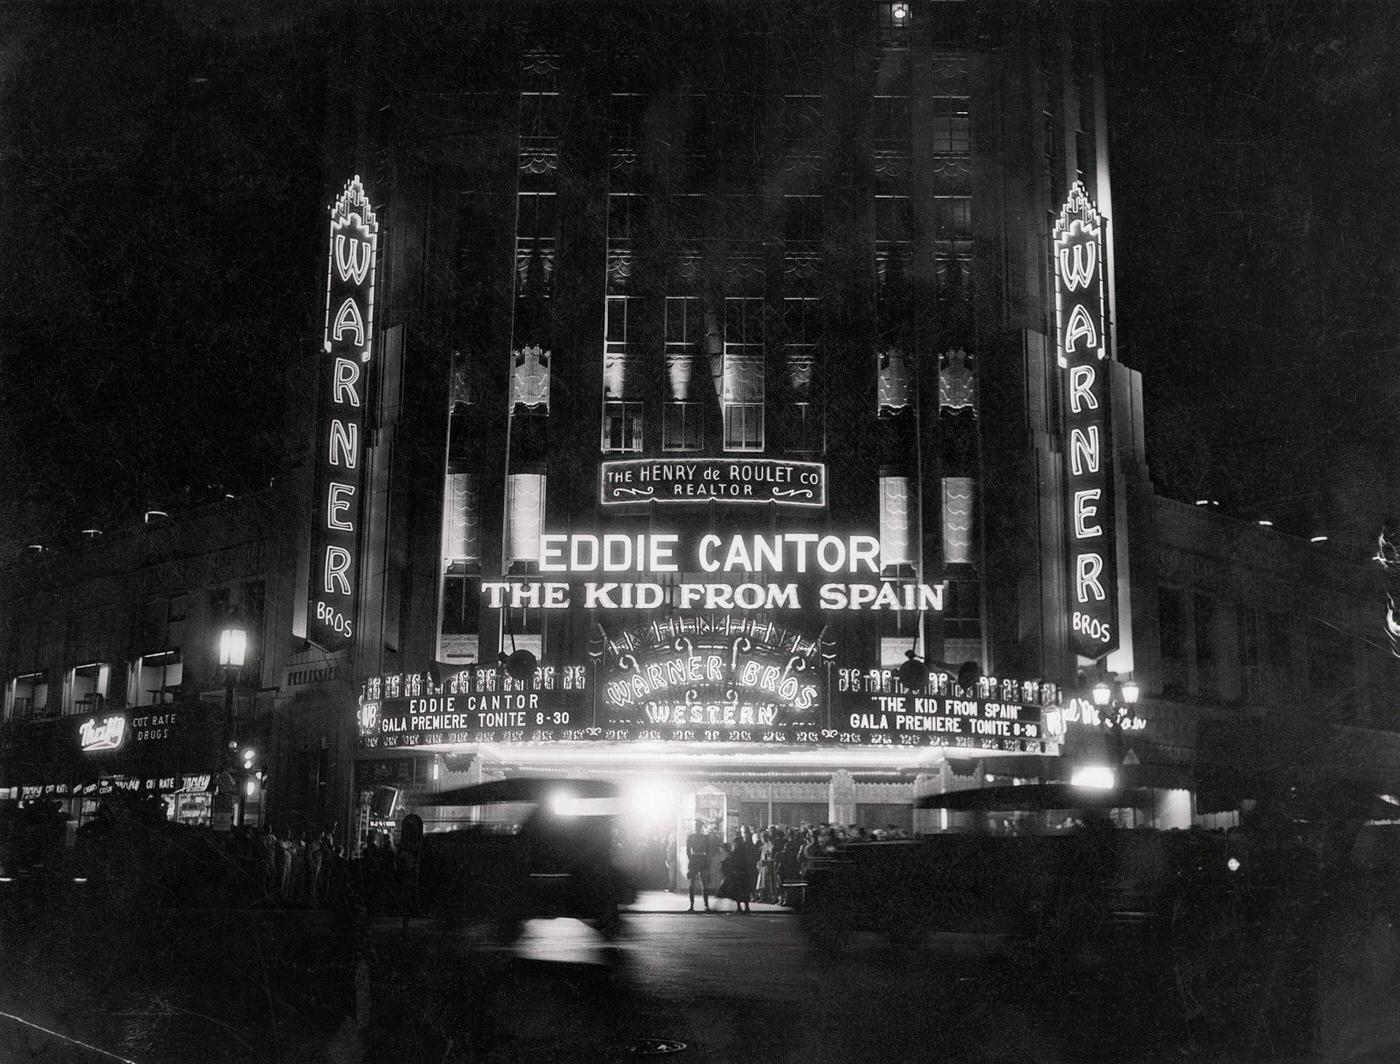 Crowds at the West Coast premiere of Eddie Cantor's The Kid from Spain at the Warner Brothers' Western Theater, on the corner of Wilshire and Western in Los Angeles, 1930s.